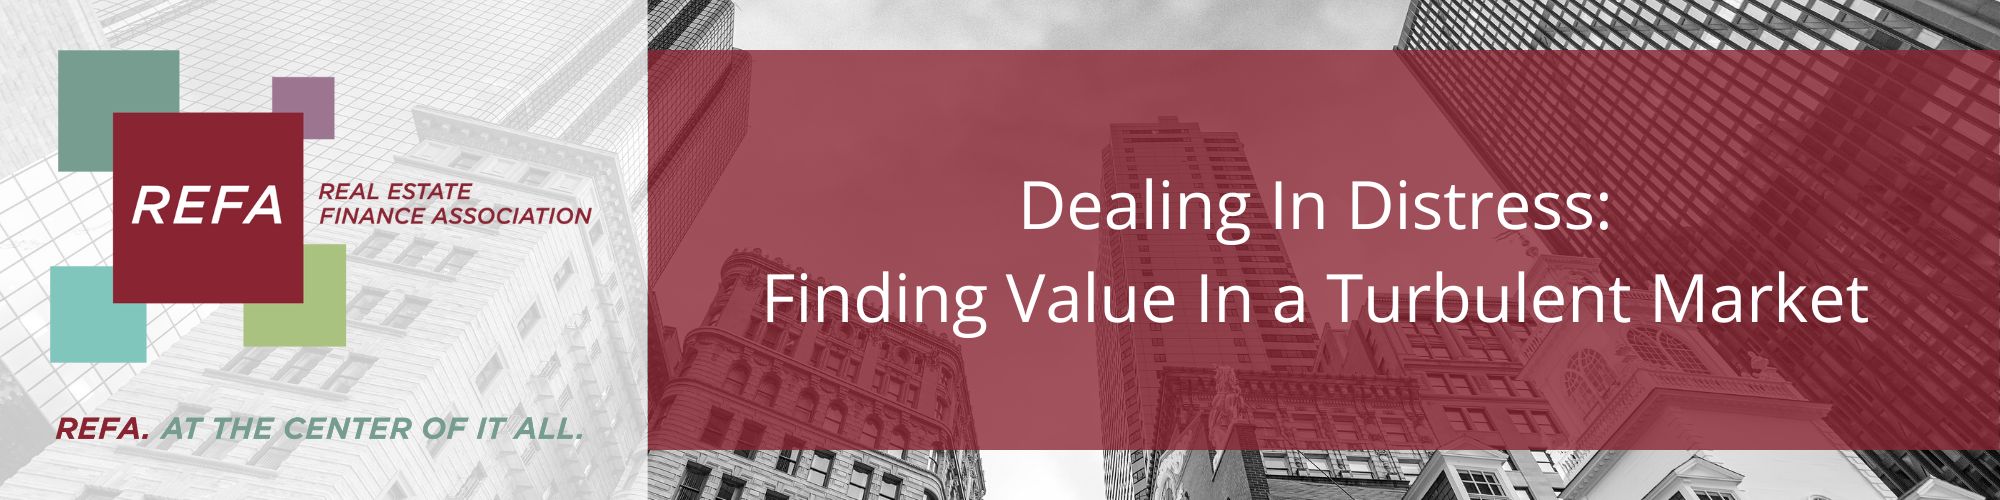 Dealing In Distress: Finding Value In a Turbulent Market